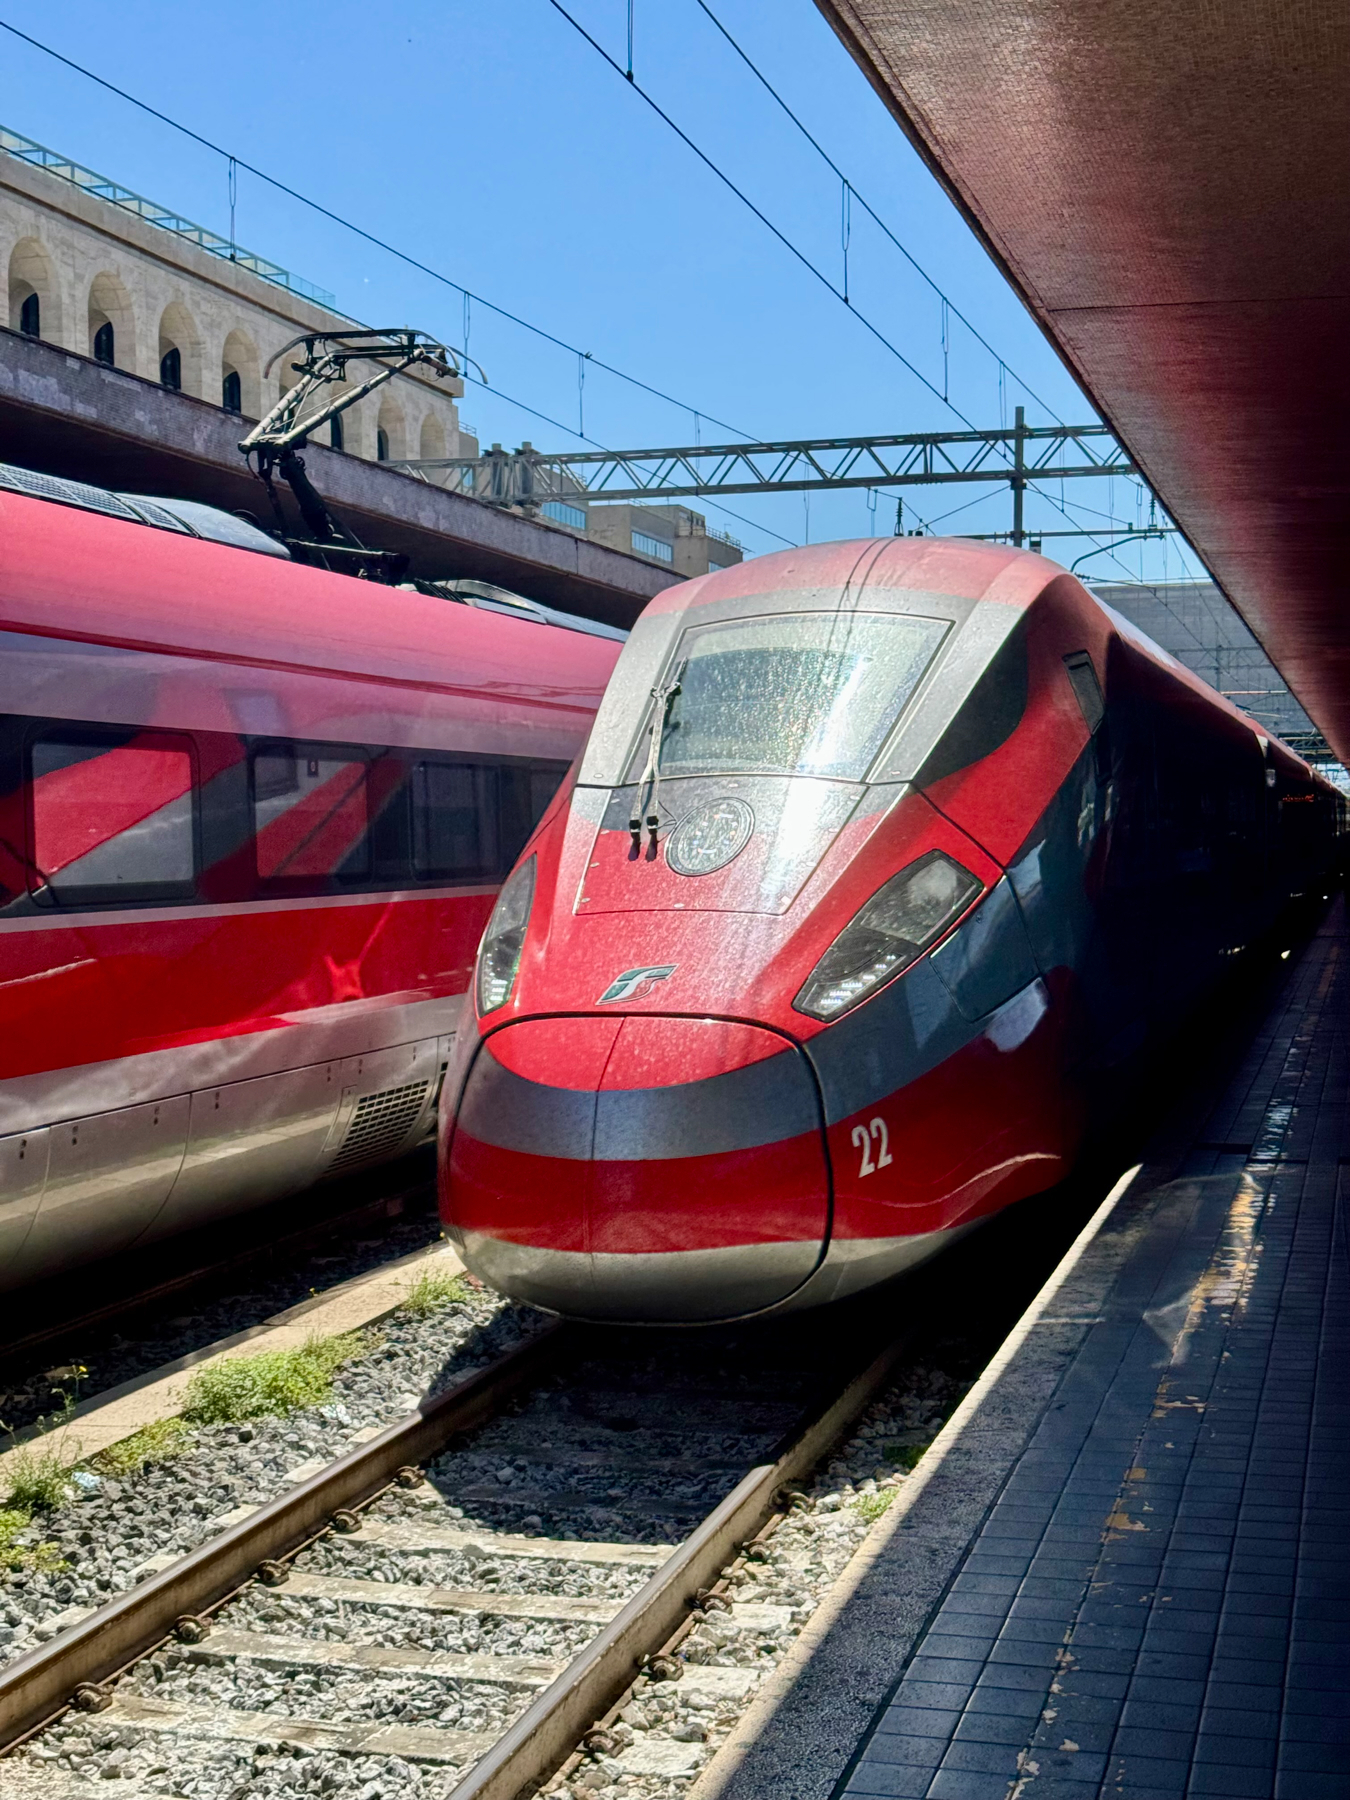 Two modern red high-speed trains are parked at an urban train station under a clear blue sky. An overhead power line system is visible above the trains.